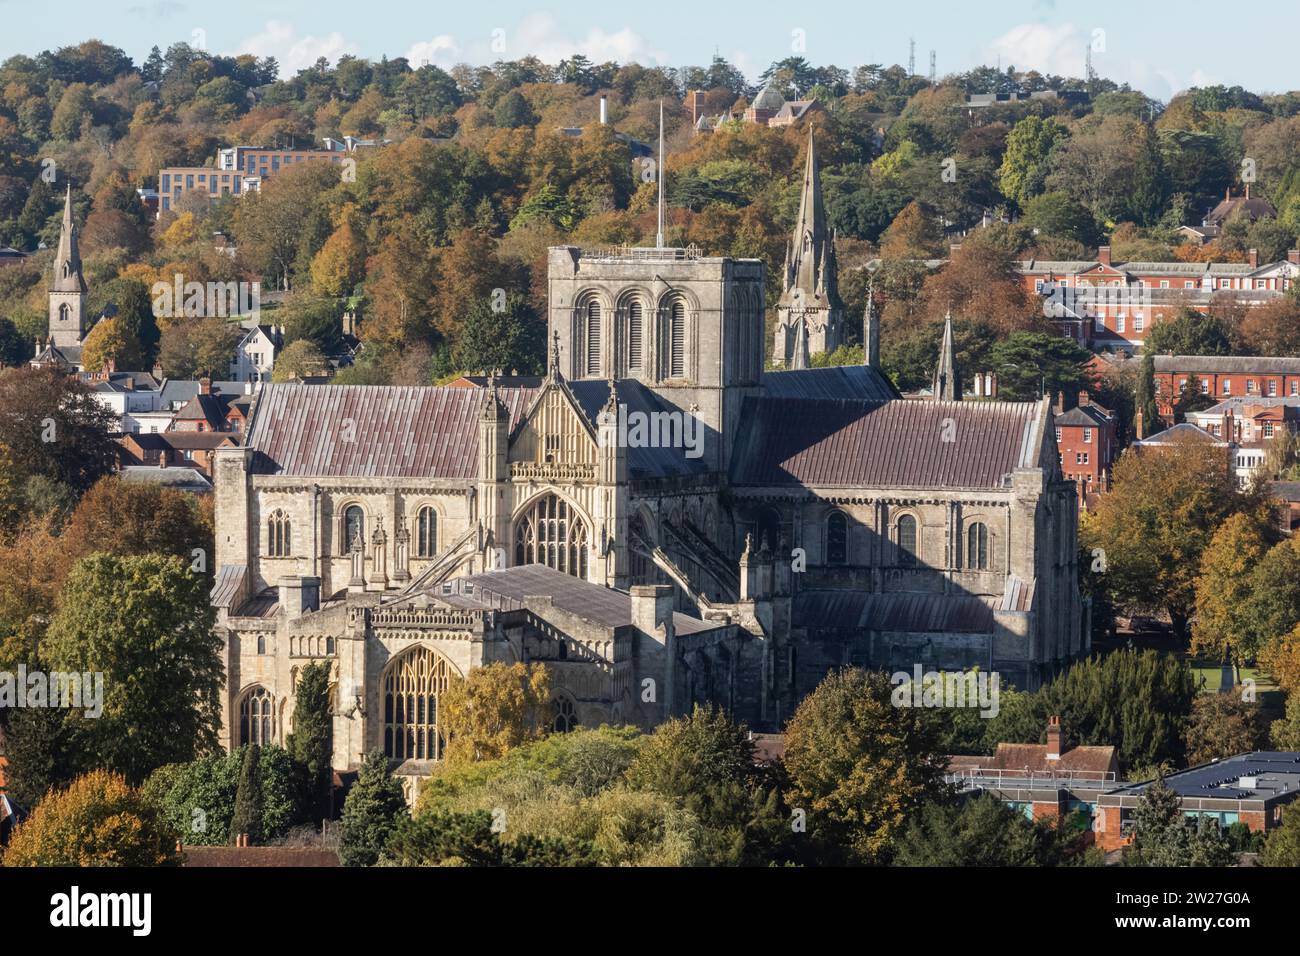 England, Hampshire, Winchester, City View Stockfoto